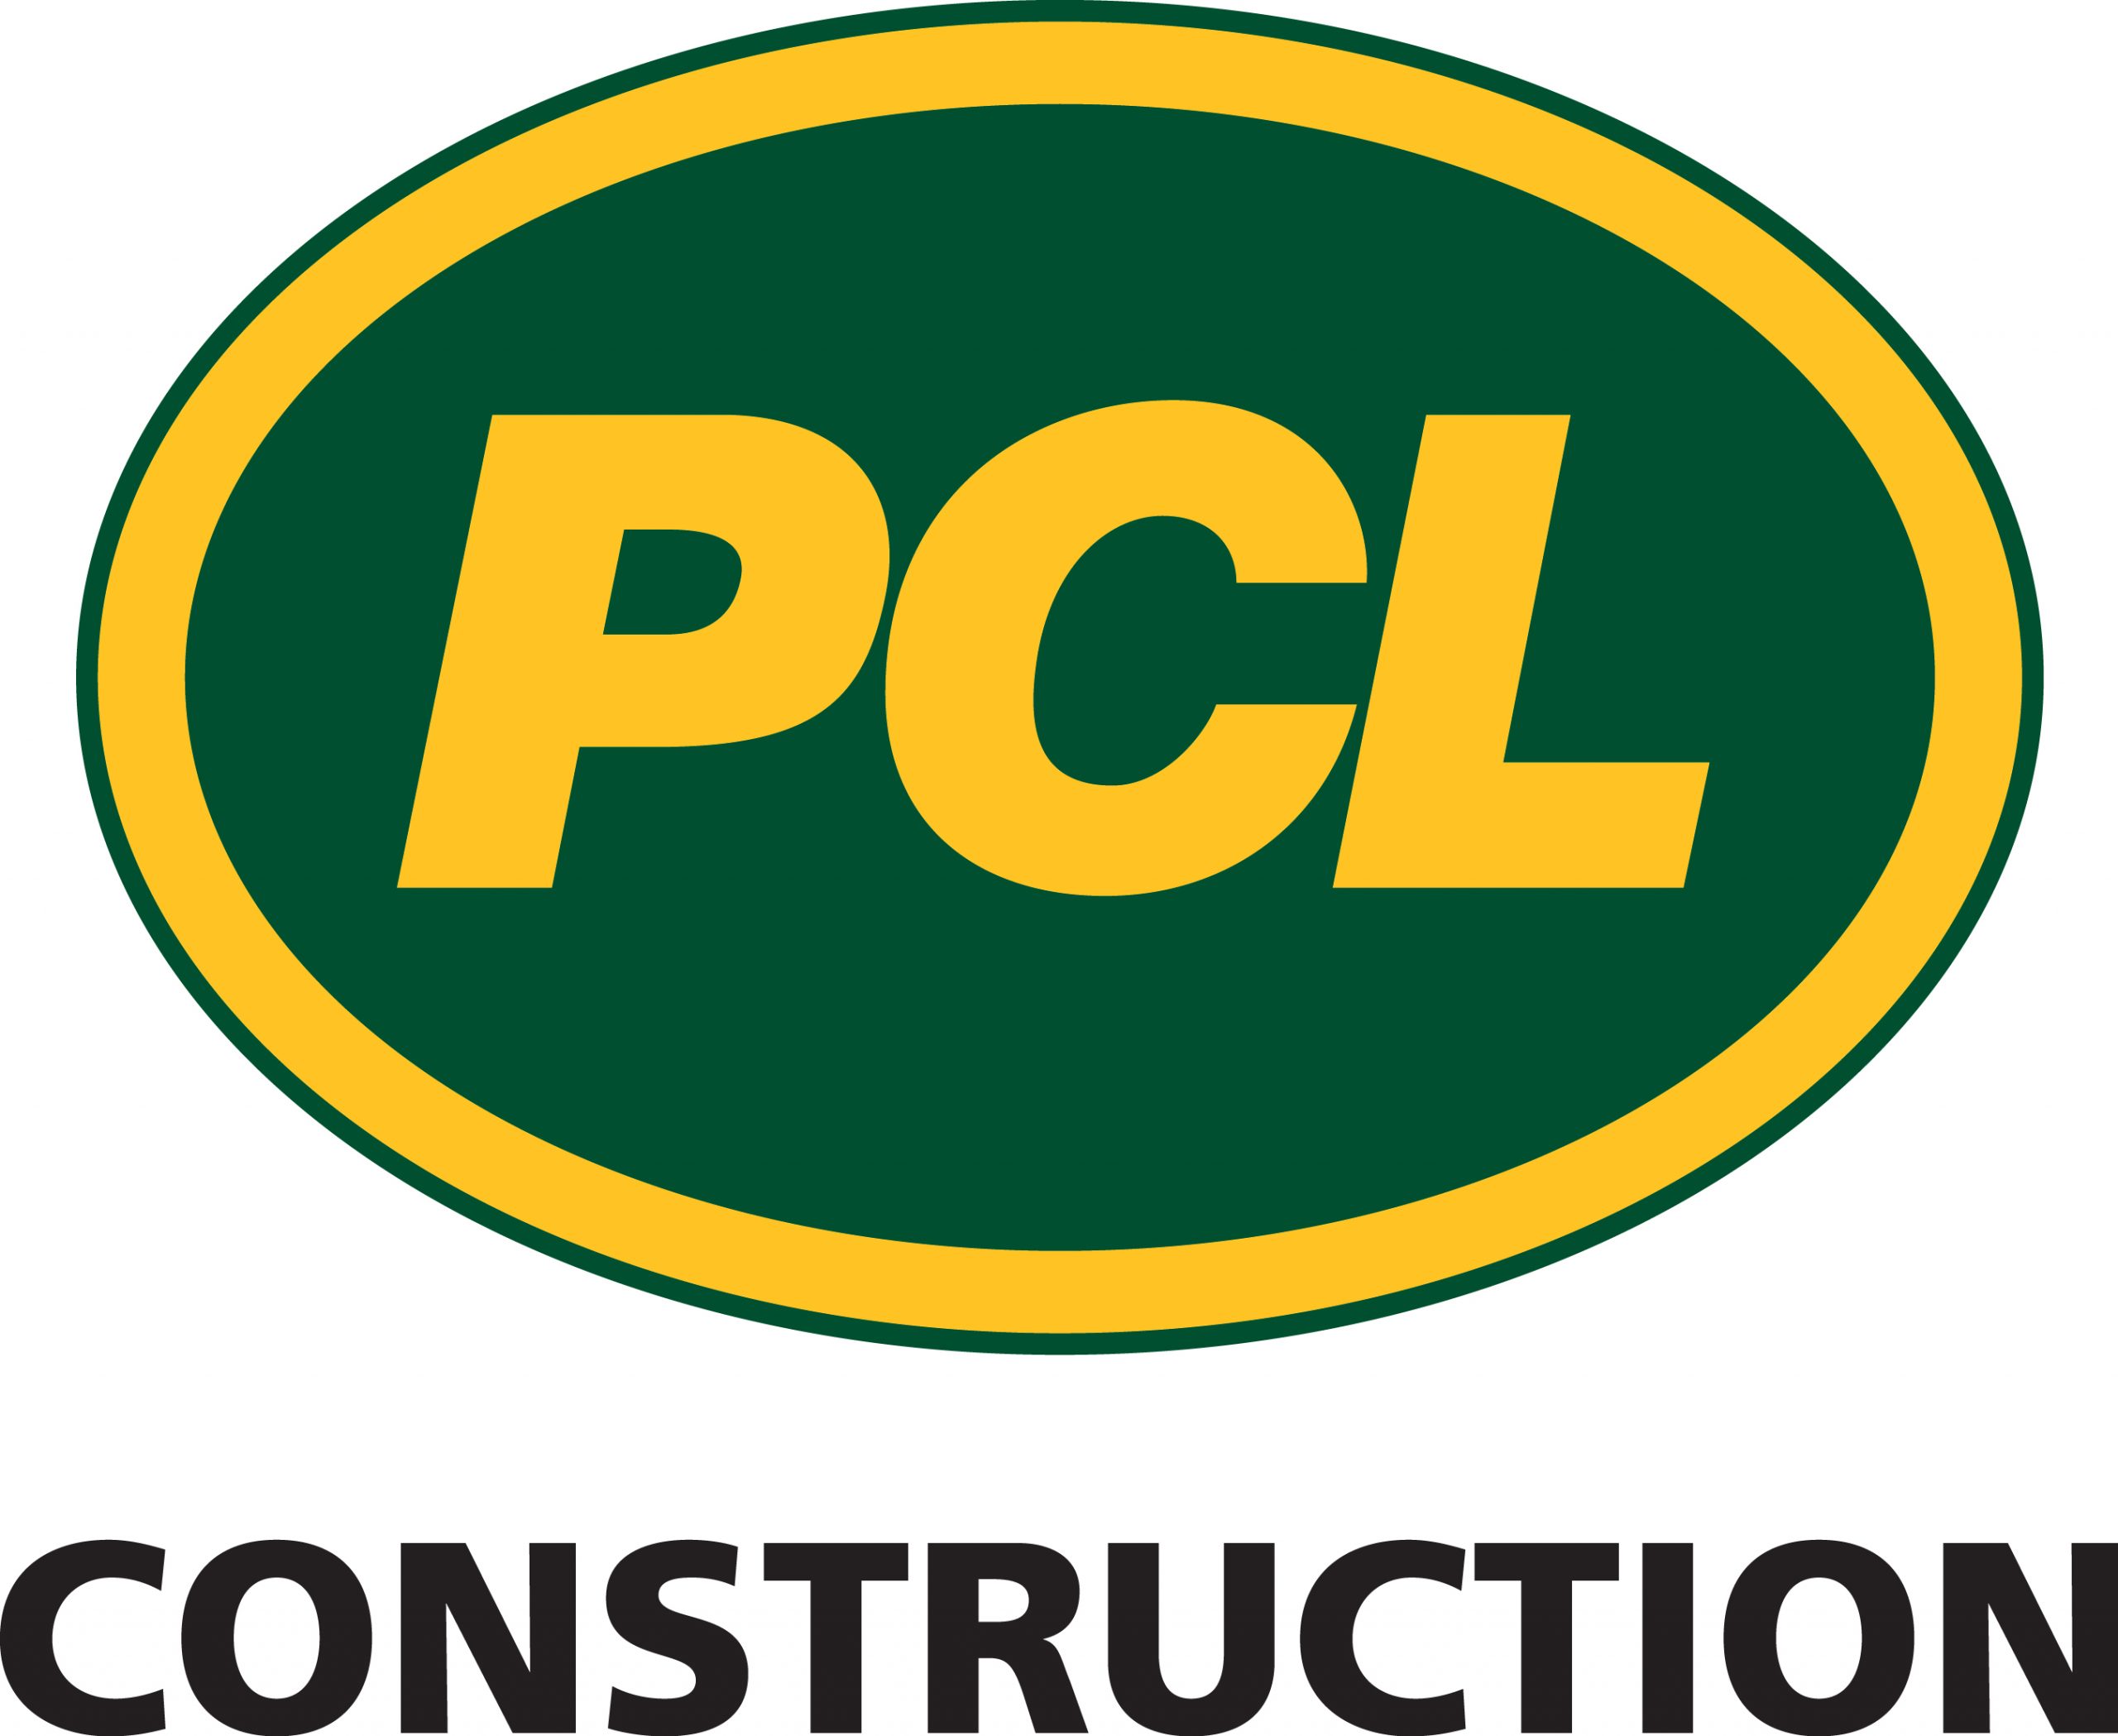 Solar and Water Construction Key in the Future of Data Center Sustainability – PCL Construction is leveraging its combined experience in solar, water and data centers to break new ground in mission critical construction.